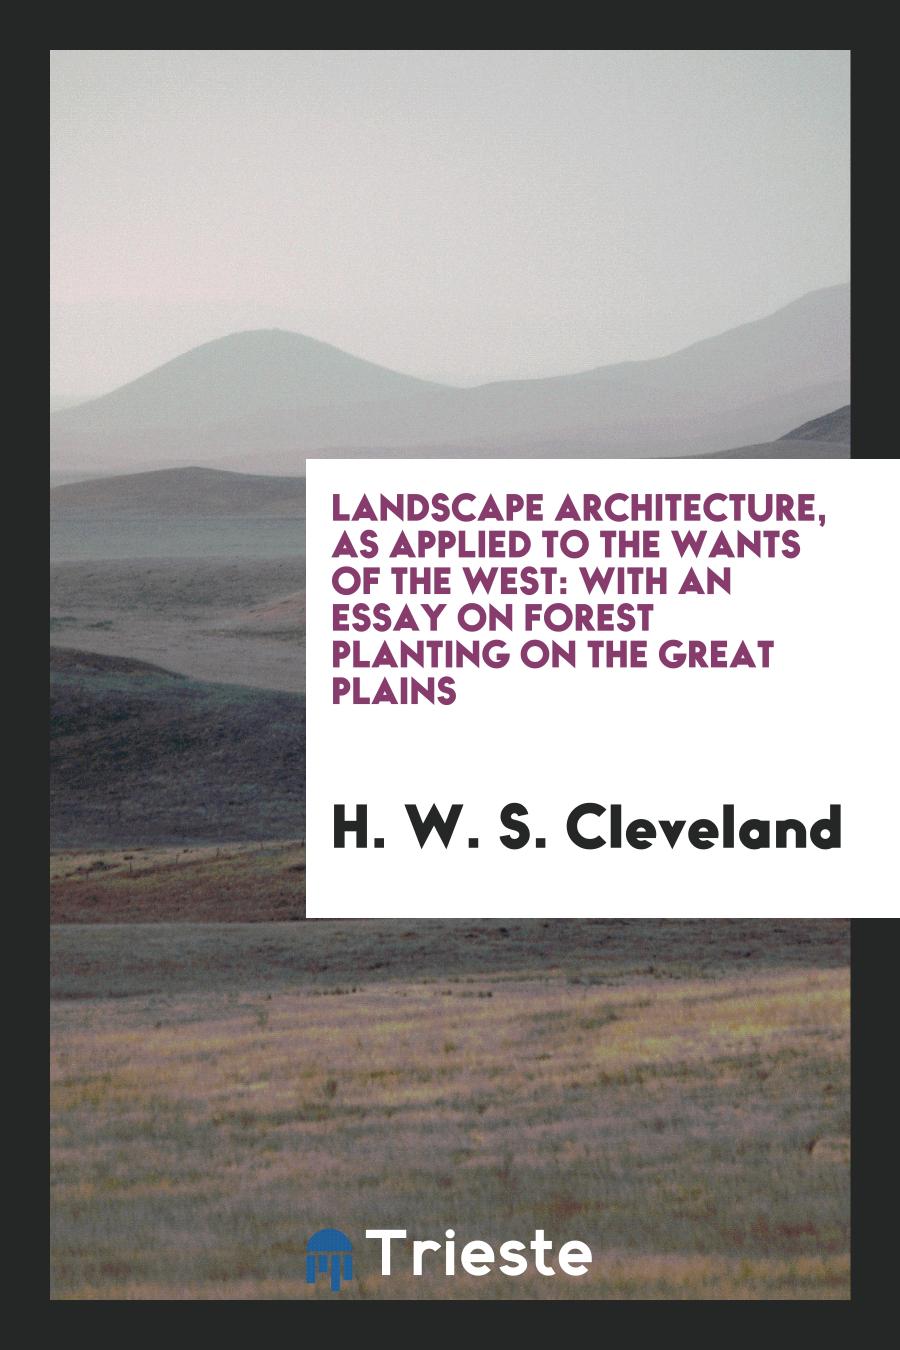 Landscape Architecture, as Applied to the Wants of the West: With an Essay on Forest Planting on the Great Plains